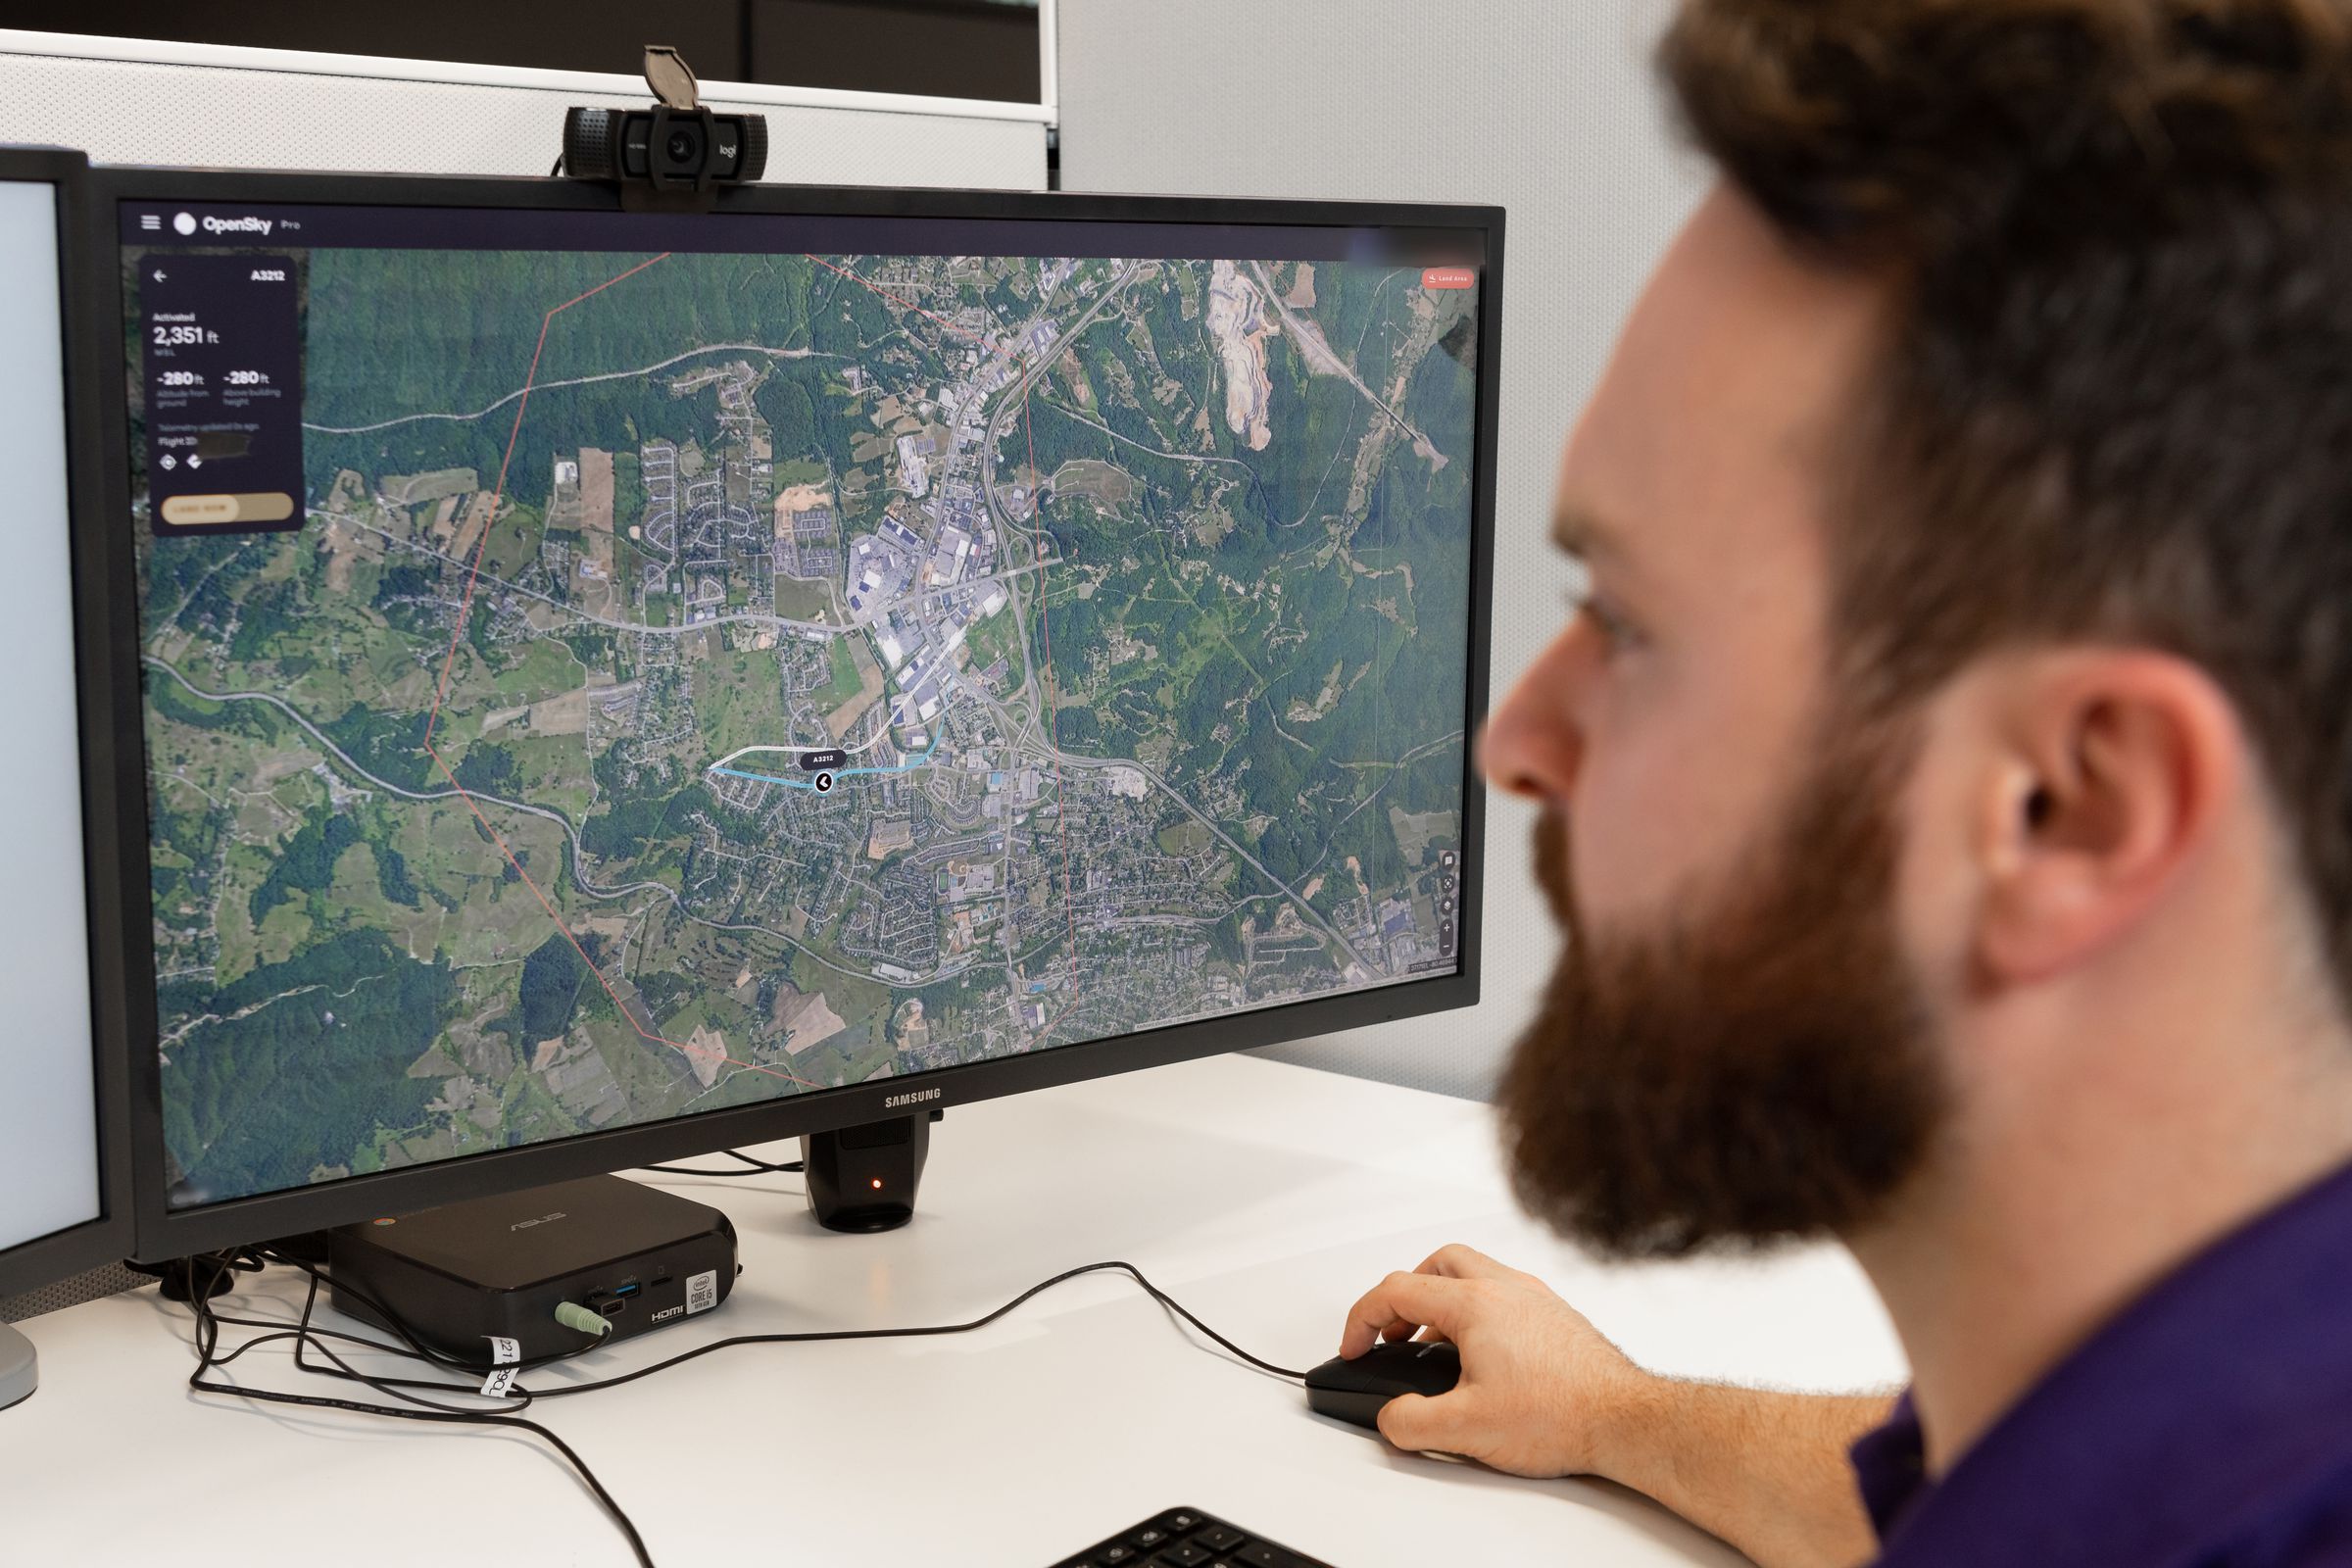 A person with a beard uses a computer with a screen that shows a map with data on the top left.